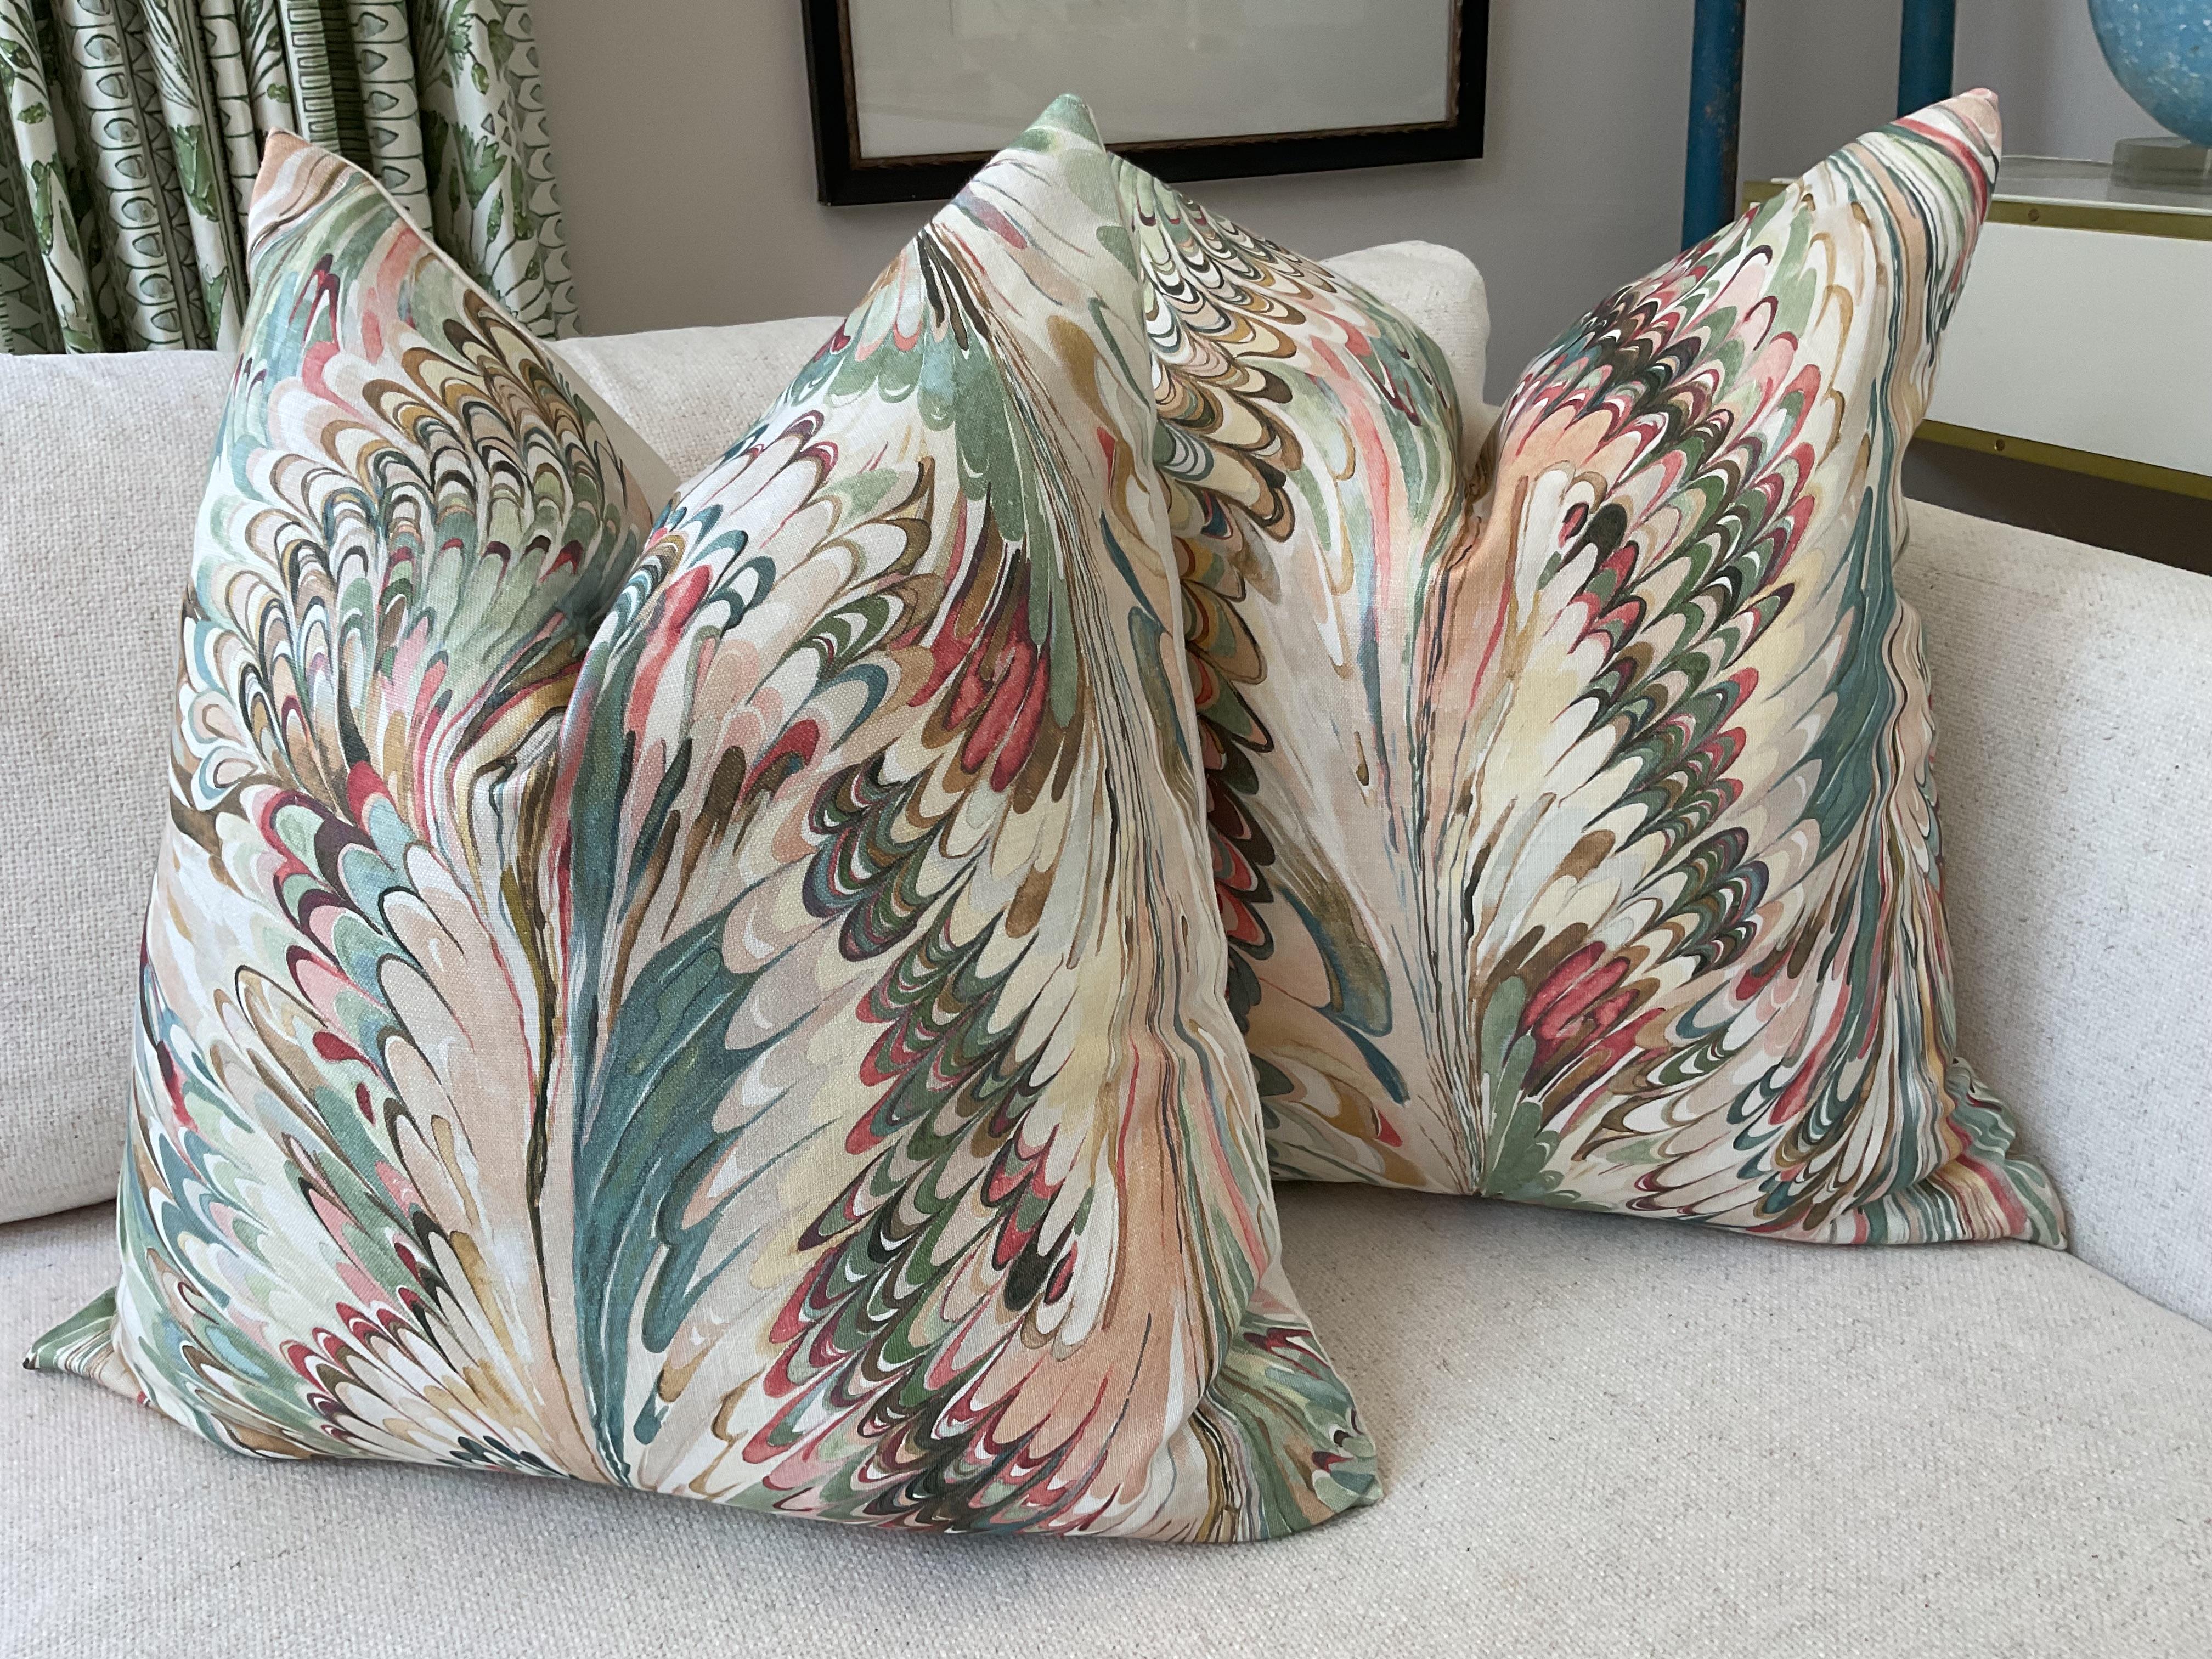 Organic Modern Pair Lee Jofa “Taplow” in peacock and gold 22” down filled pillows  For Sale